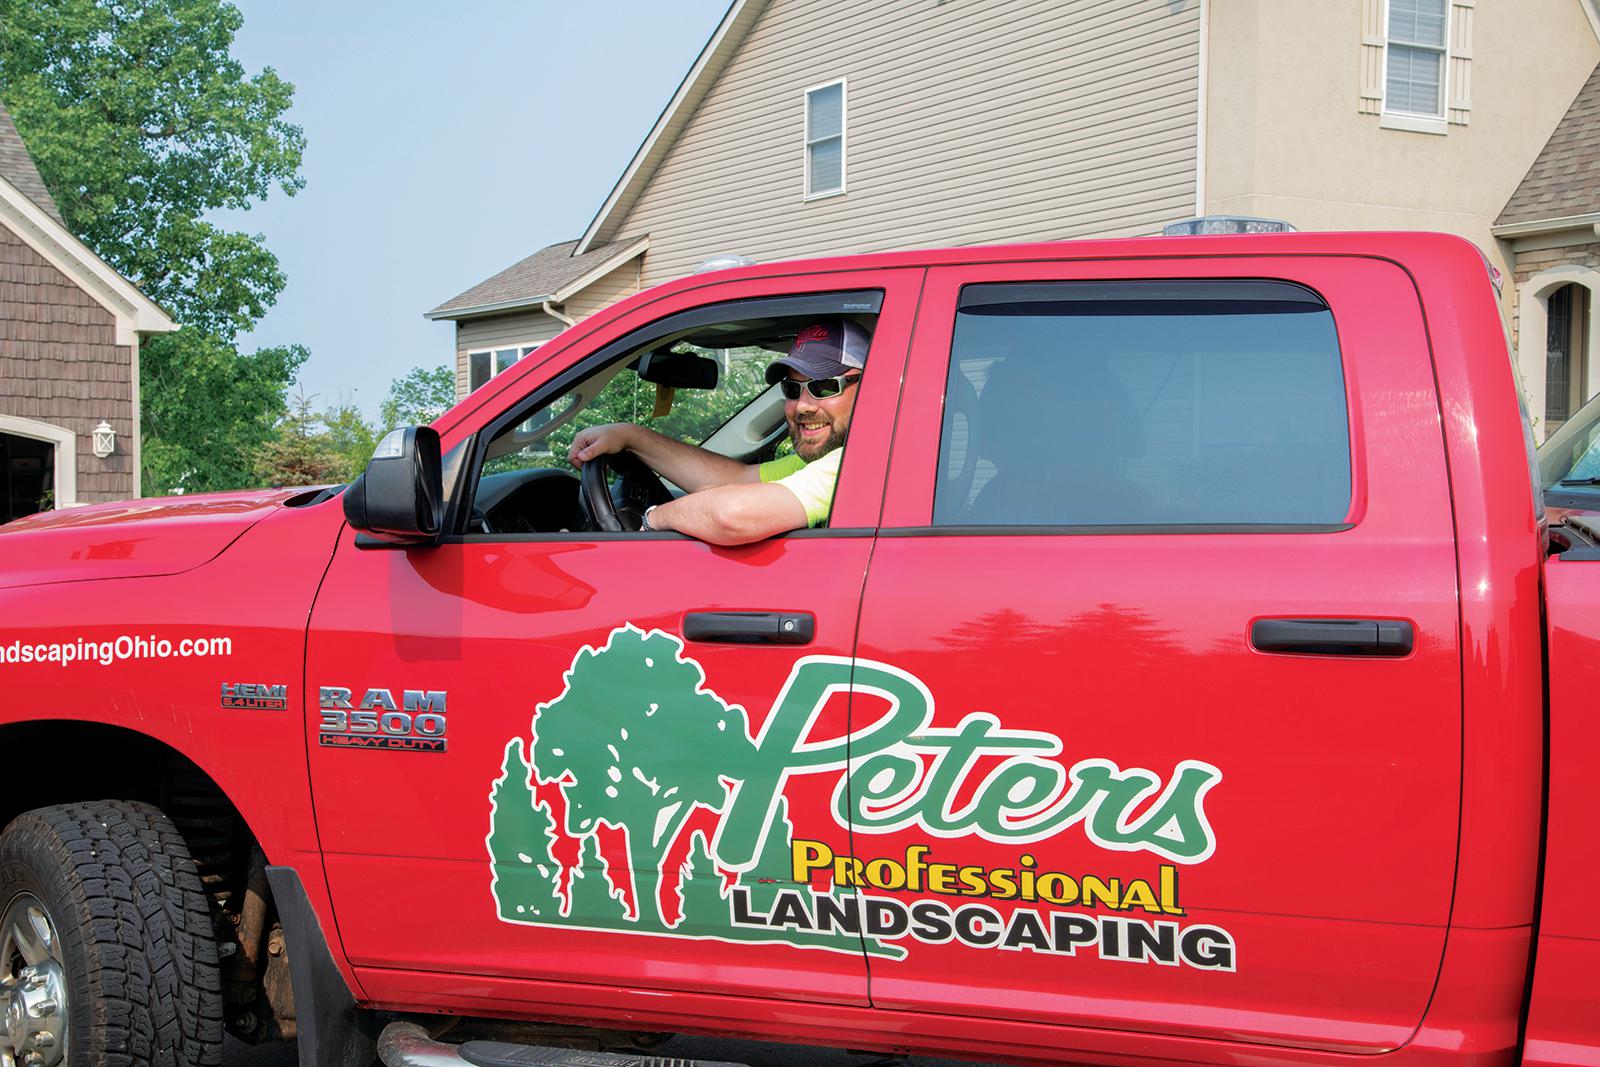 Peters Professional Landscaping Photo